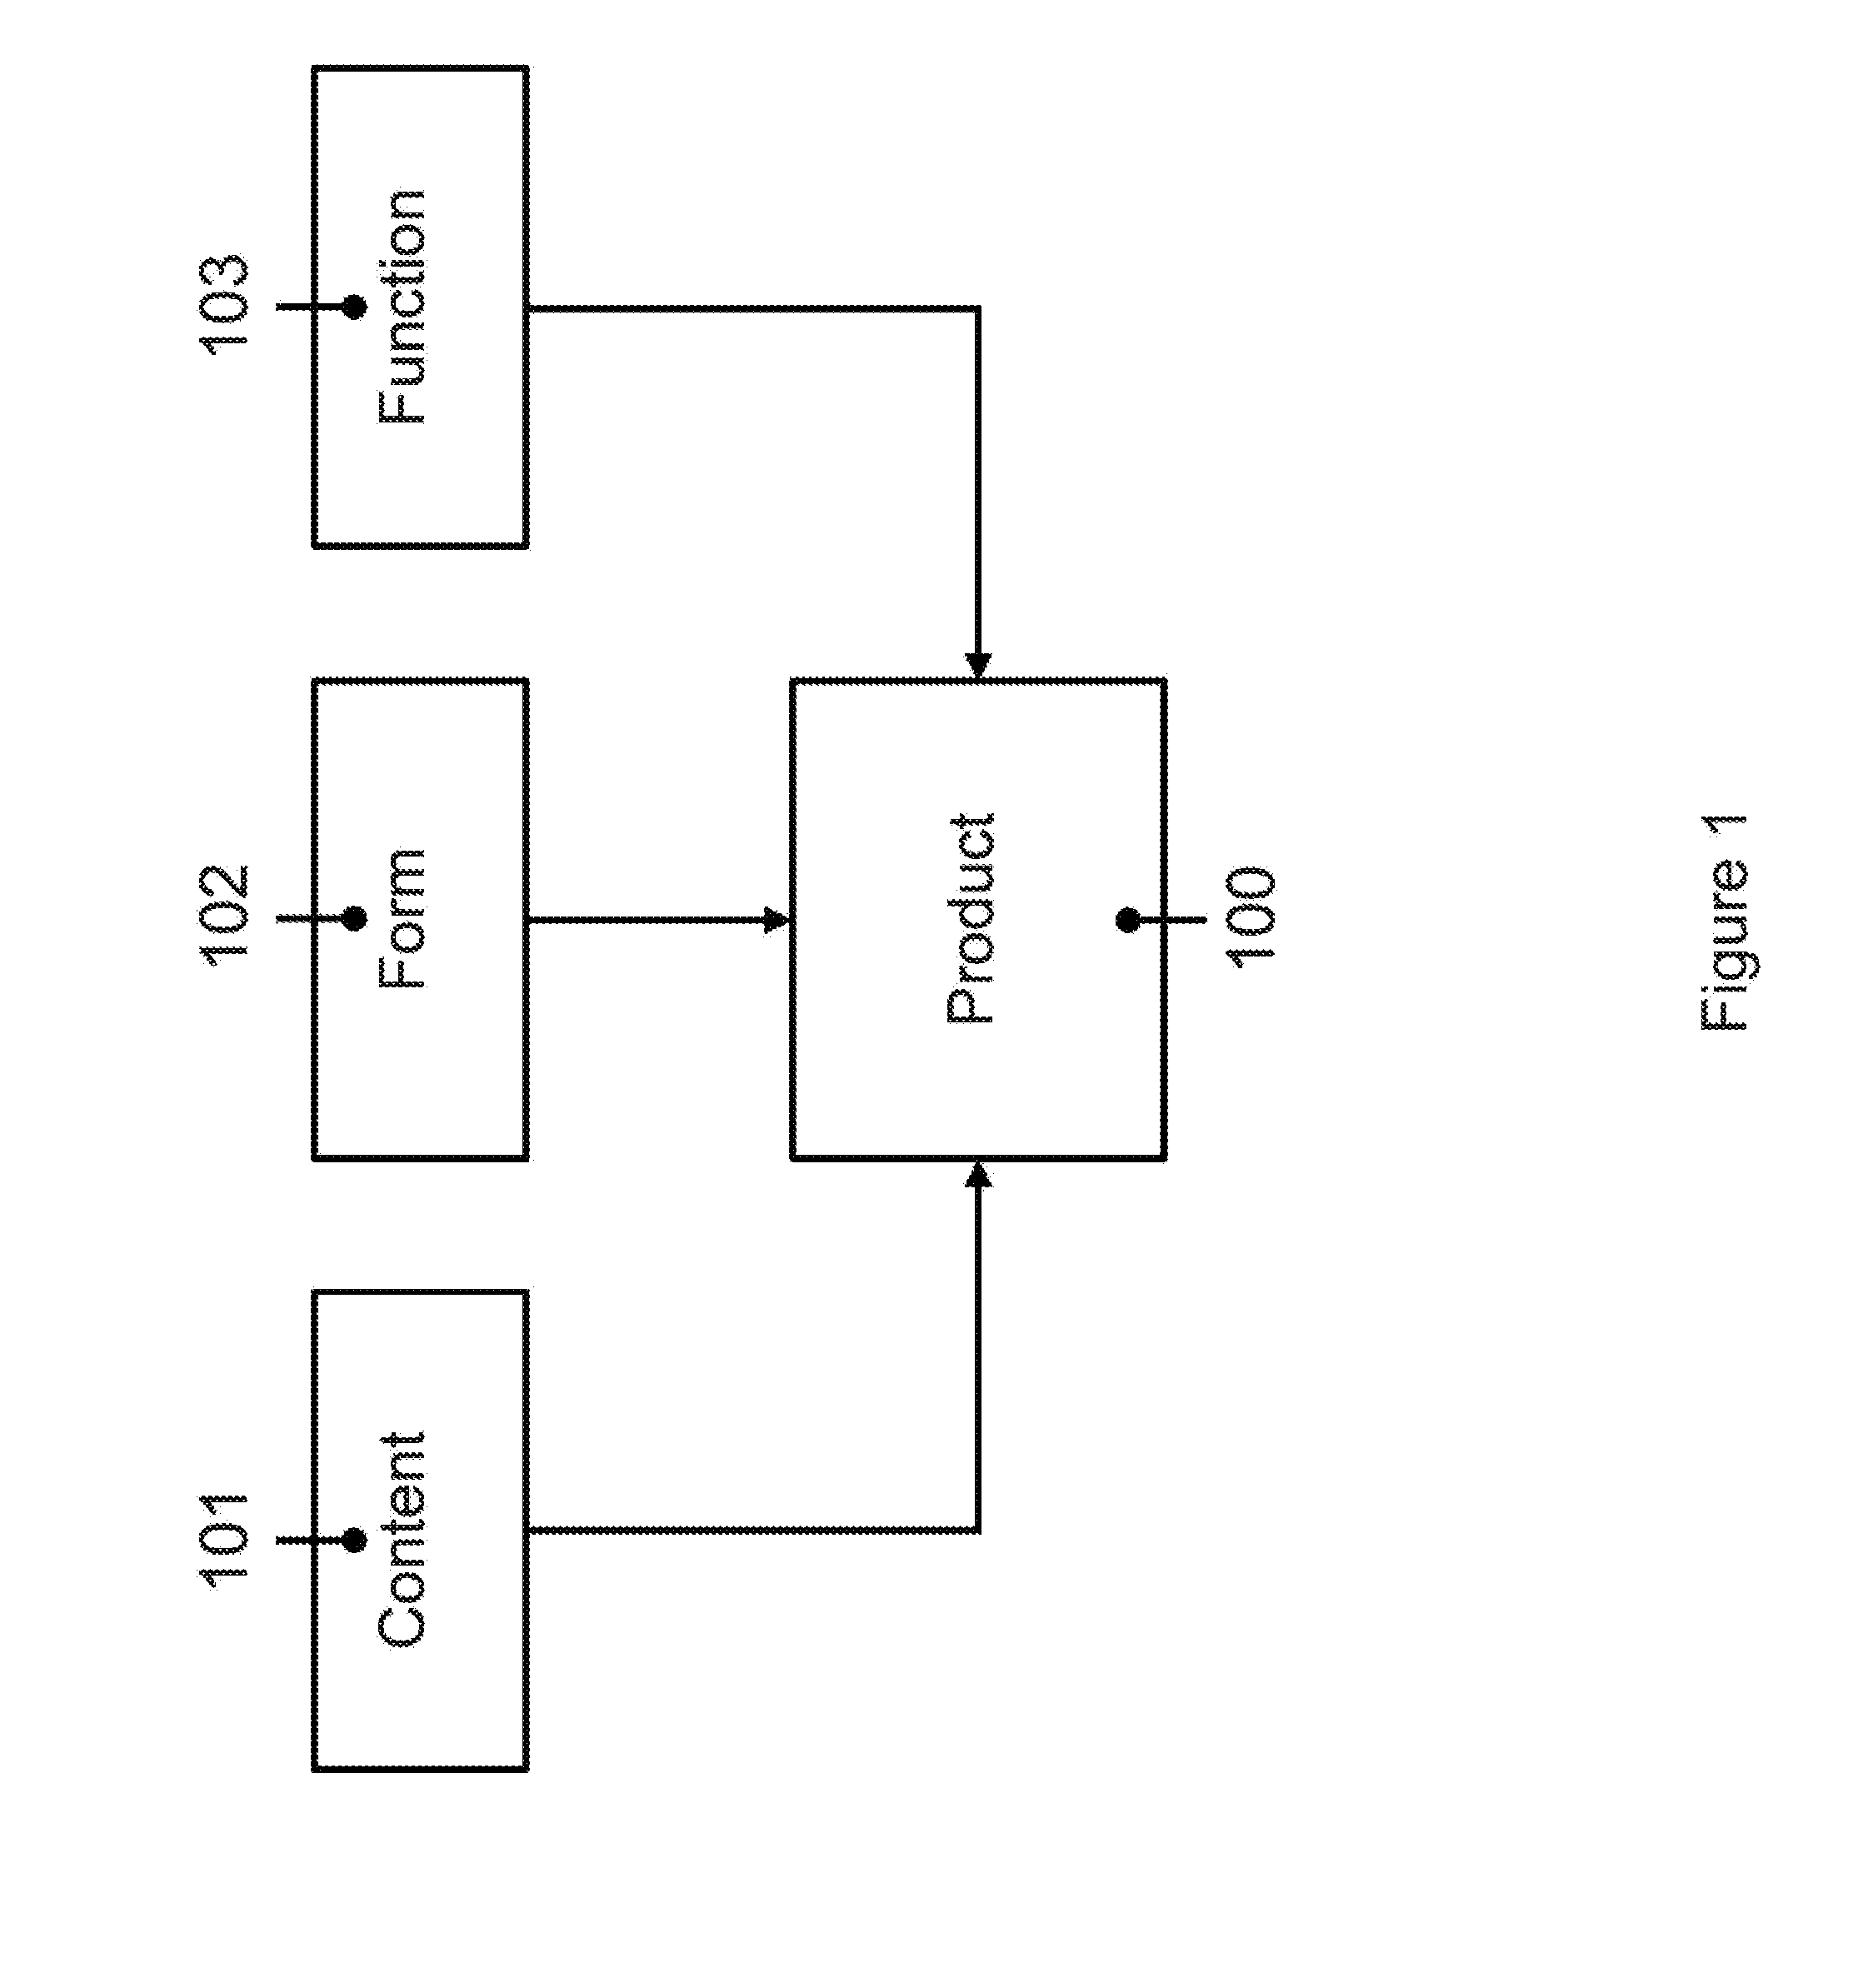 Methods, Systems, Apparatus, Products, Articles and Data Structures for Cross-Platform Digital Content